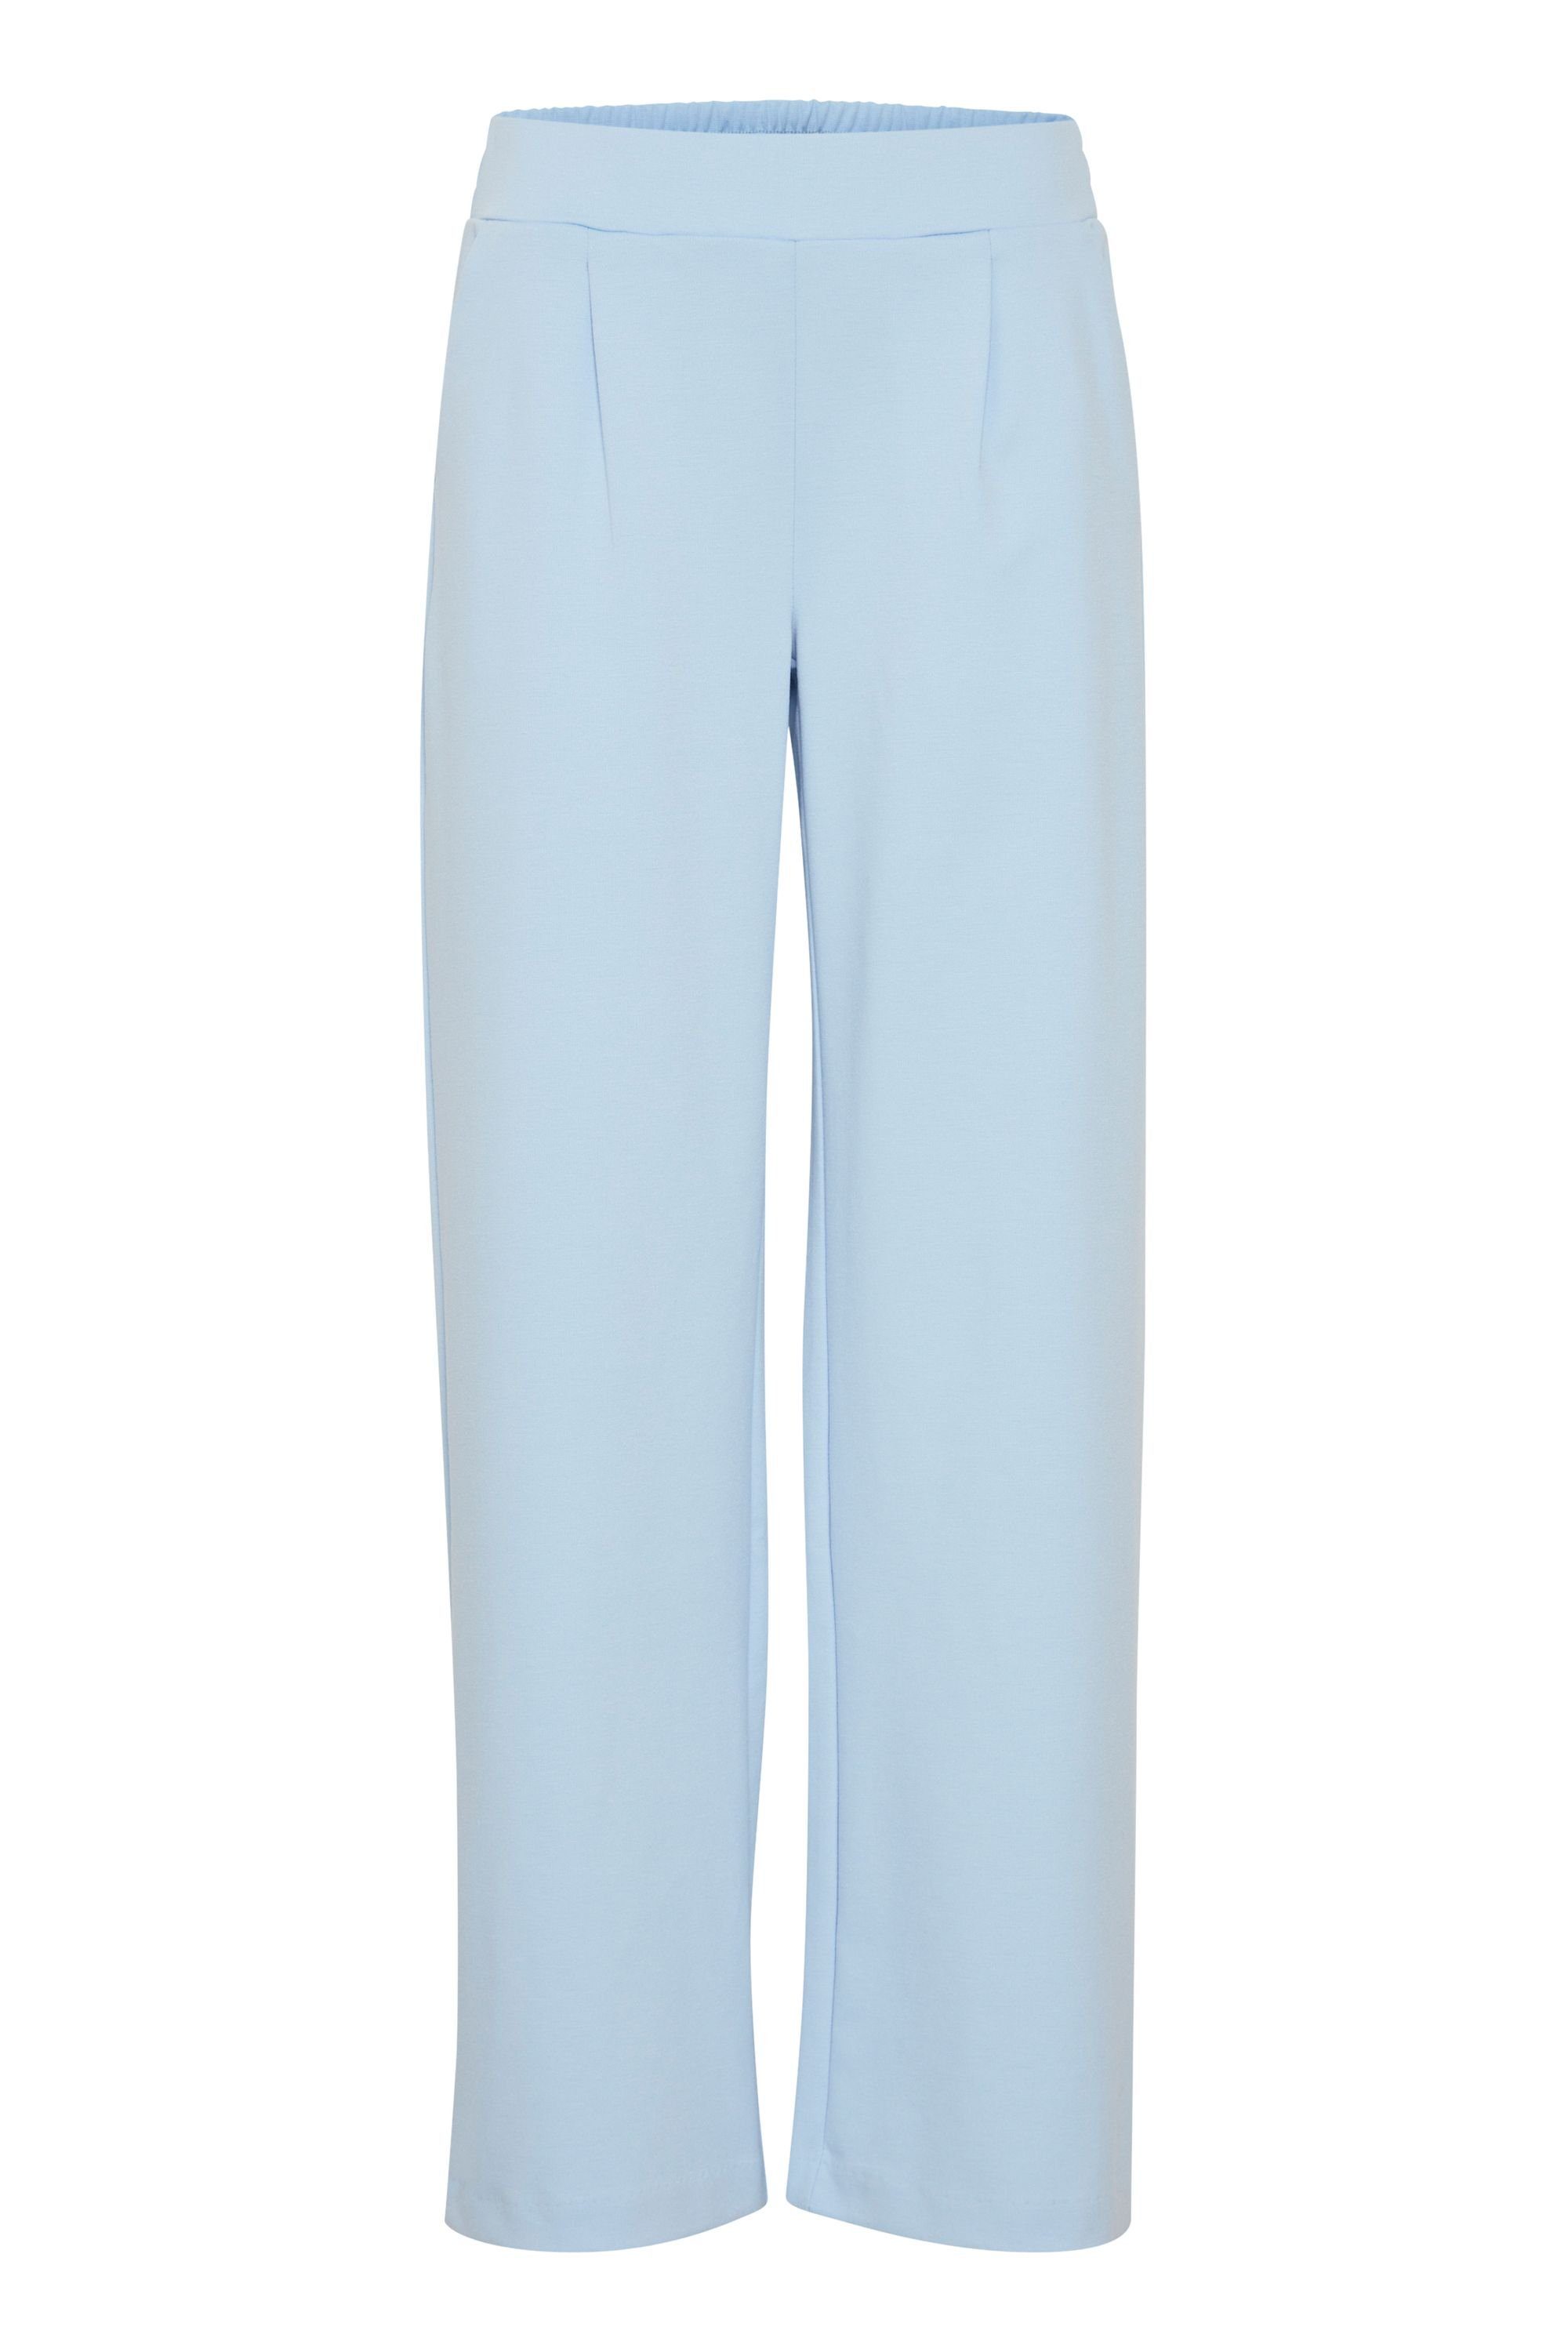 Bell PANTS b.young 2 Blue 2 20812847 - WIDE (144121) BYRIZETTA Stoffhose